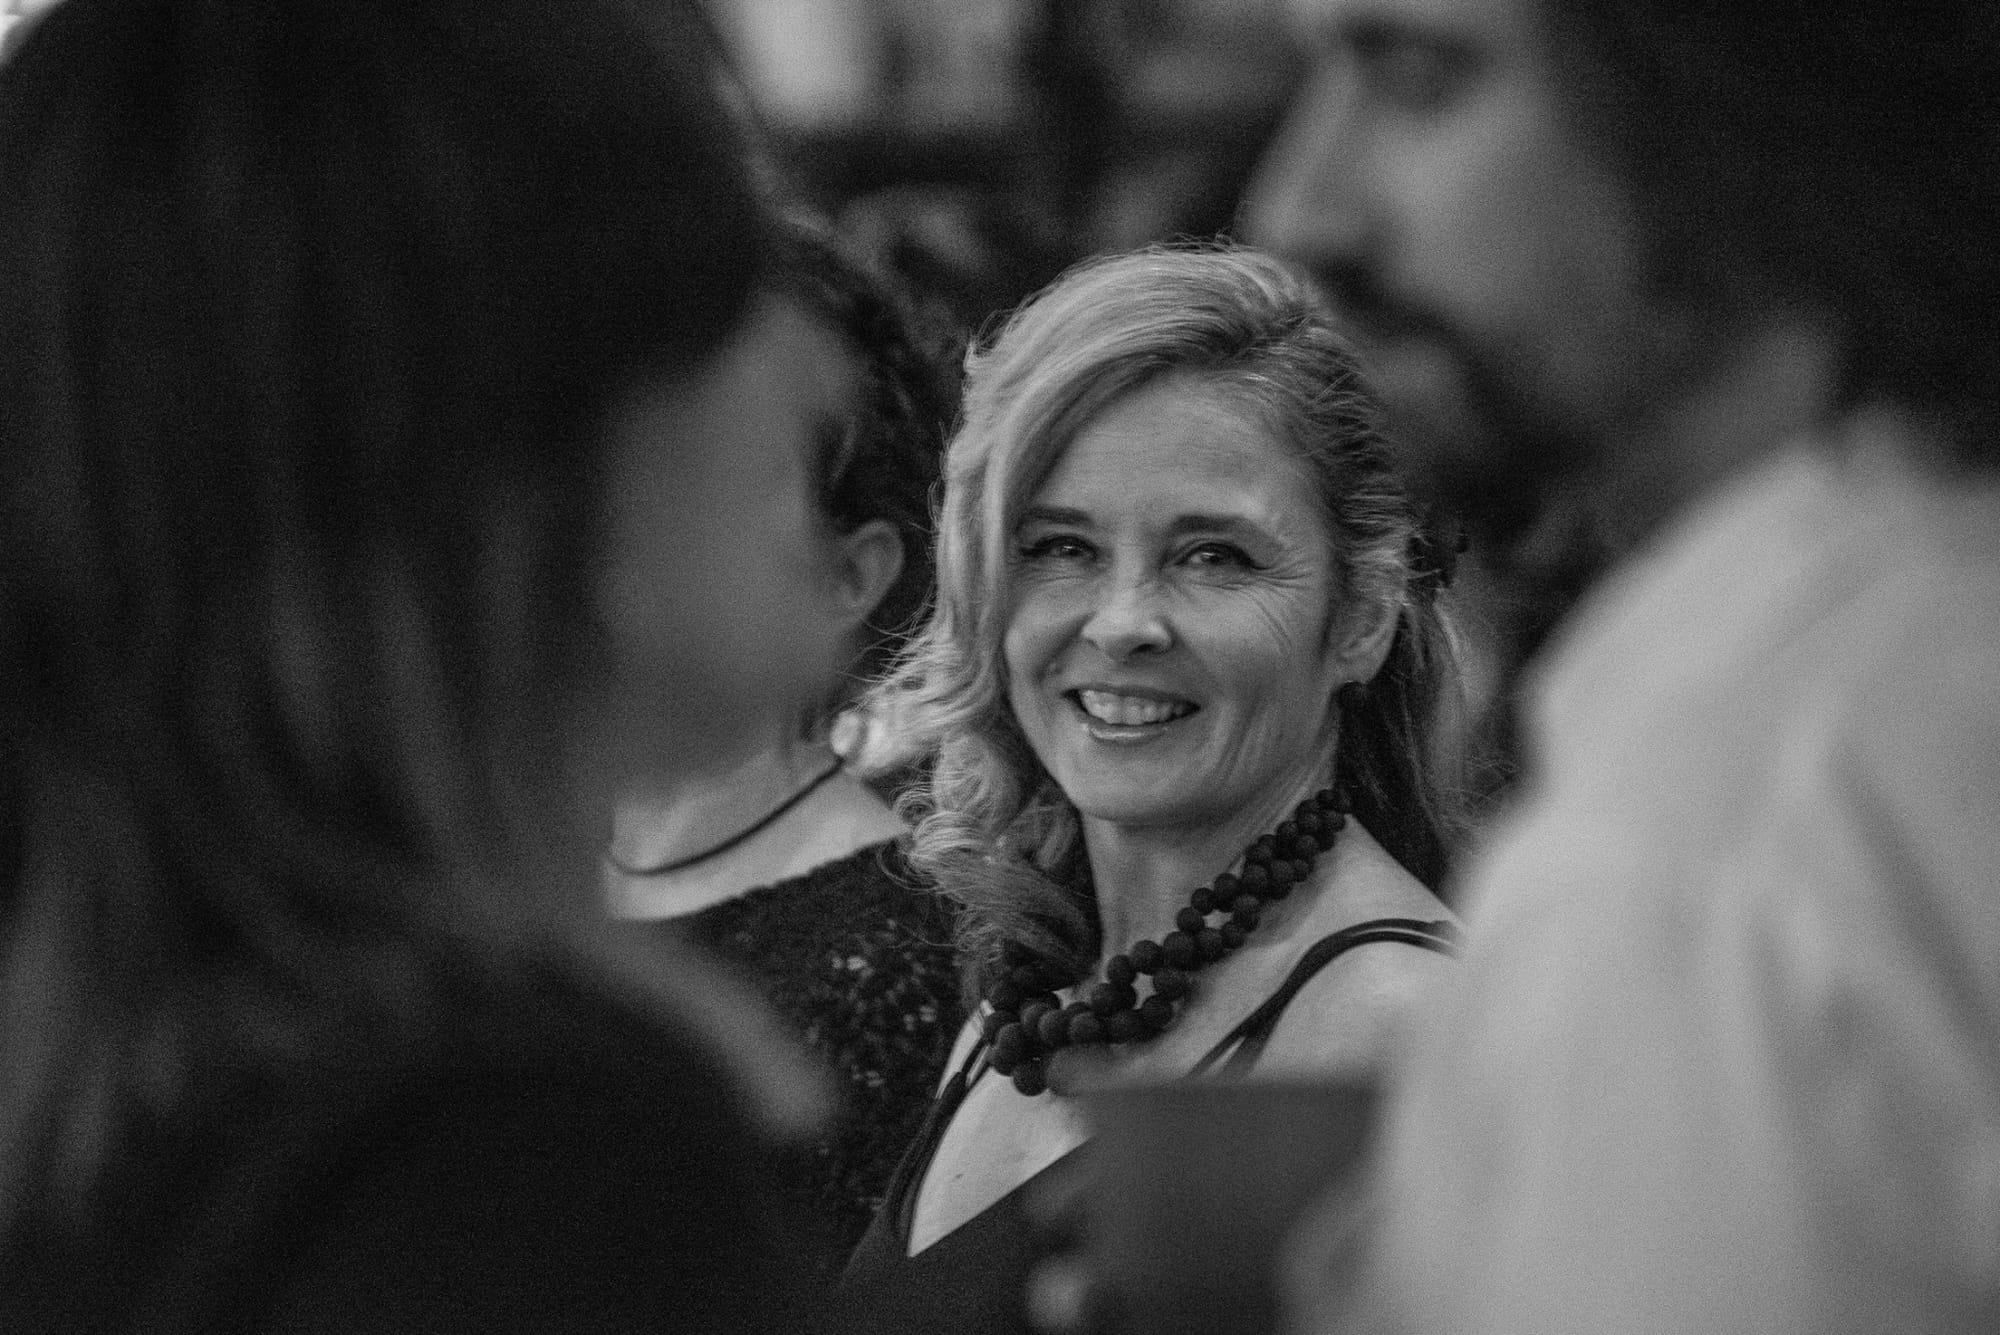 Bobbi Leach is shown from the shoulders up in a black and white photo taken at a RevenueWire Christmas party in 2017.